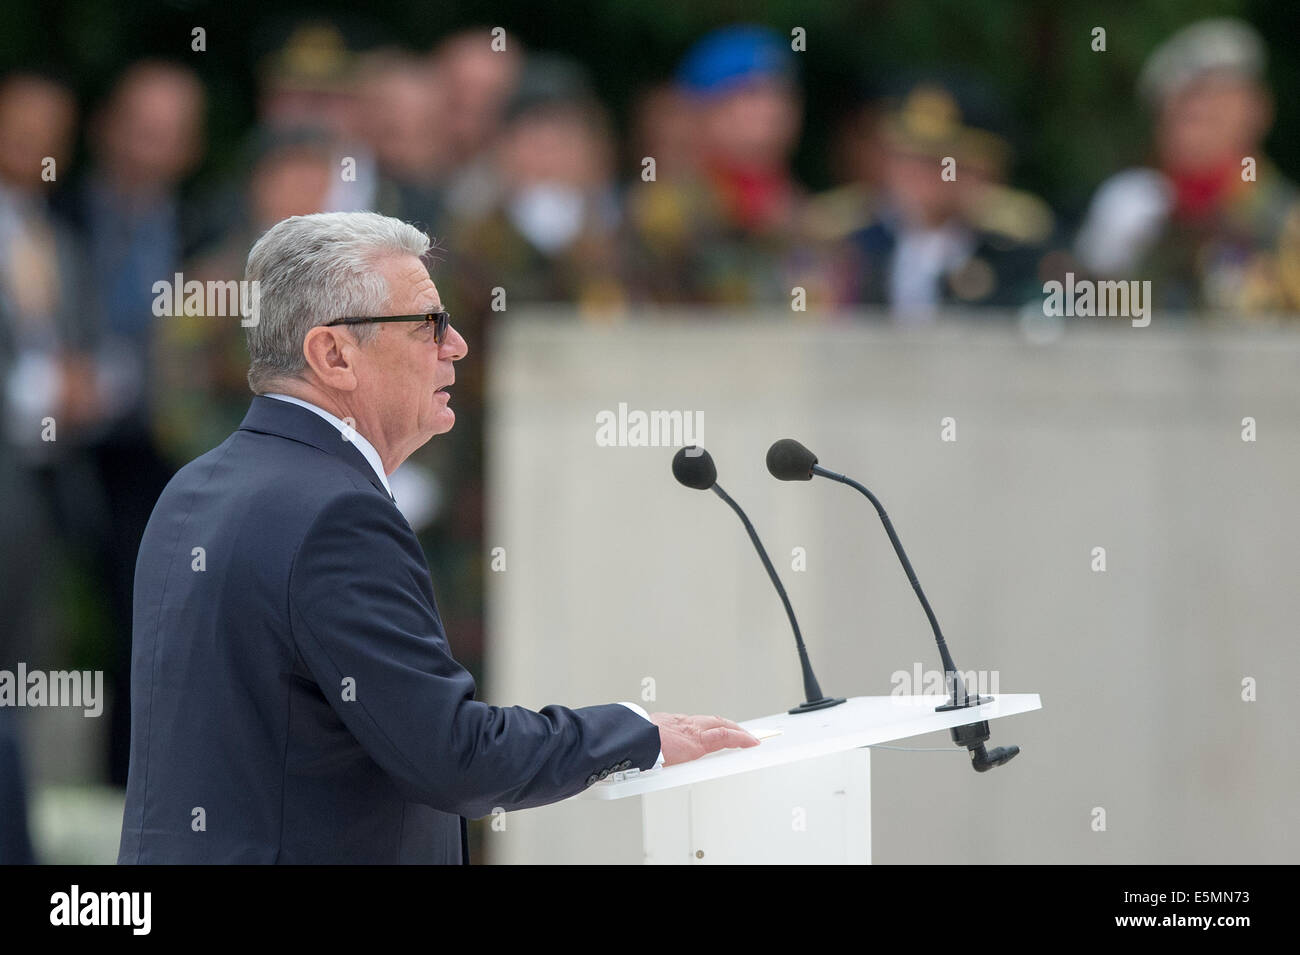 Liege, Belgium. 04th Aug, 2014. German President Joachim Gauck speaks during the international memorial ceremony for the 100th anniversary of the beginning of the First World War in Liege, Belgium, 04 August 2014. The year 2014 sees the 100th anniversary of the beginning of WWI, or the Great War, which according to official statistics cost more than 37 million military and civilian casualties between 1914 and 1918. Photo: Maurizio Gambarini/dpa/Alamy Live News Stock Photo